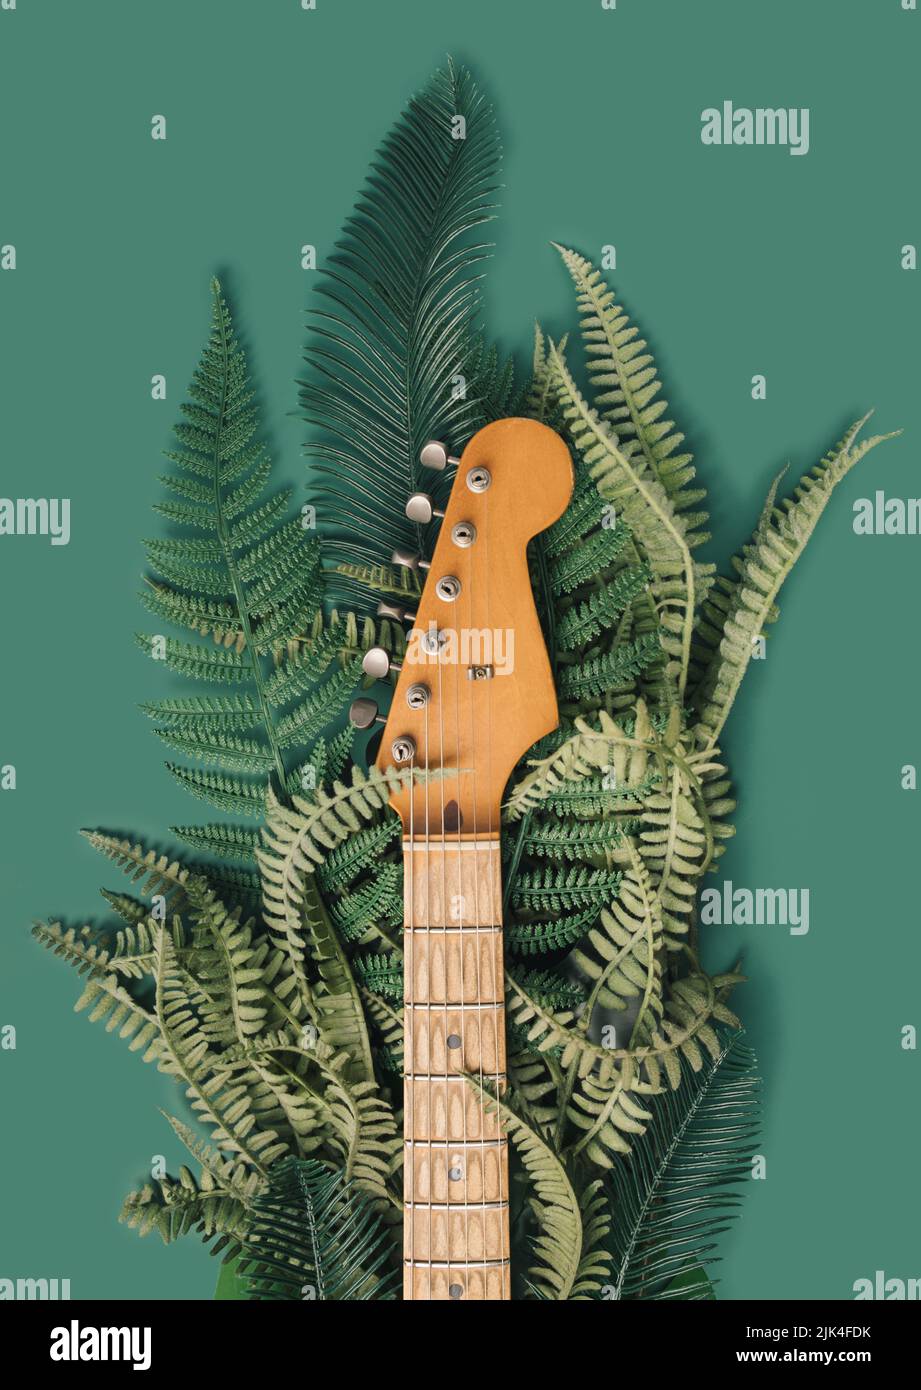 Worn electric guitar maple neck with foliage background. Nature sounds concept. Stock Photo